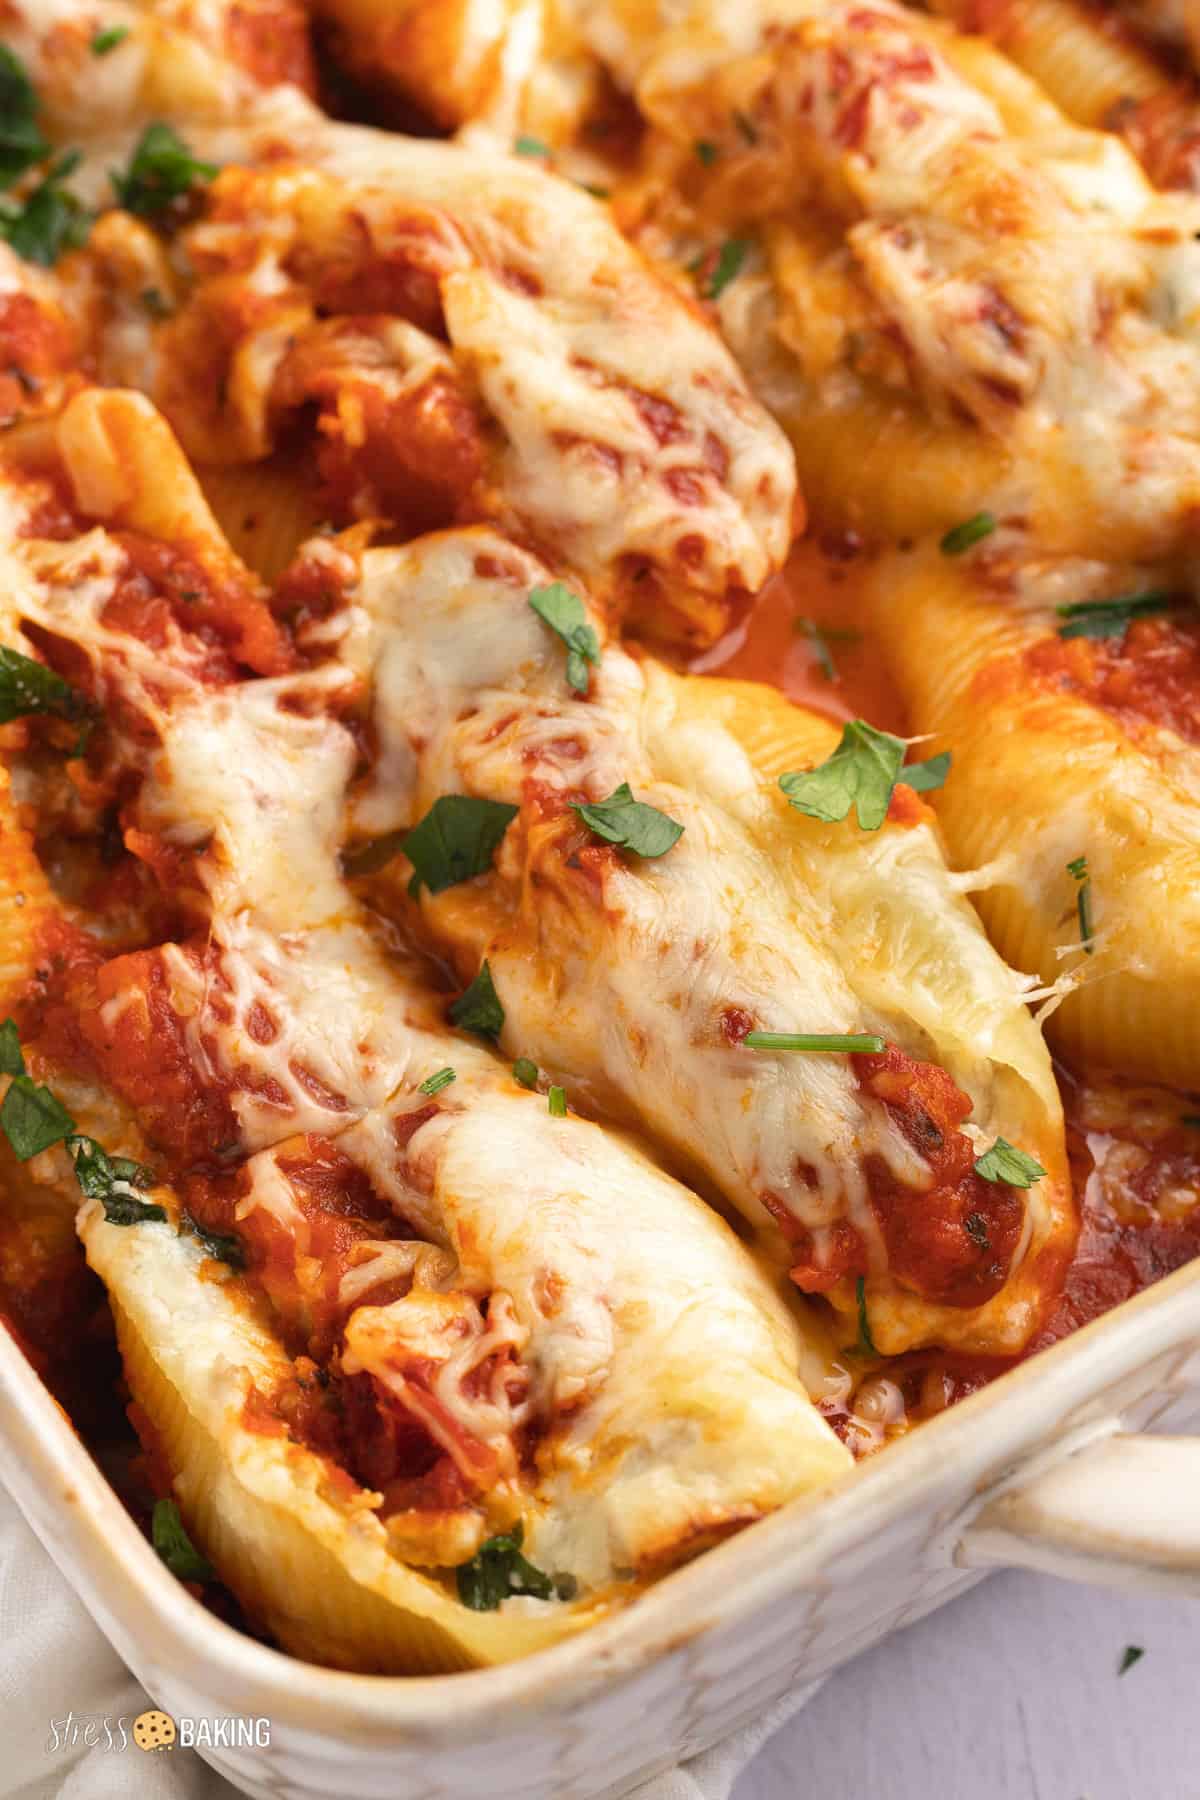 Golden cheesy stuffed shells topped with parsley